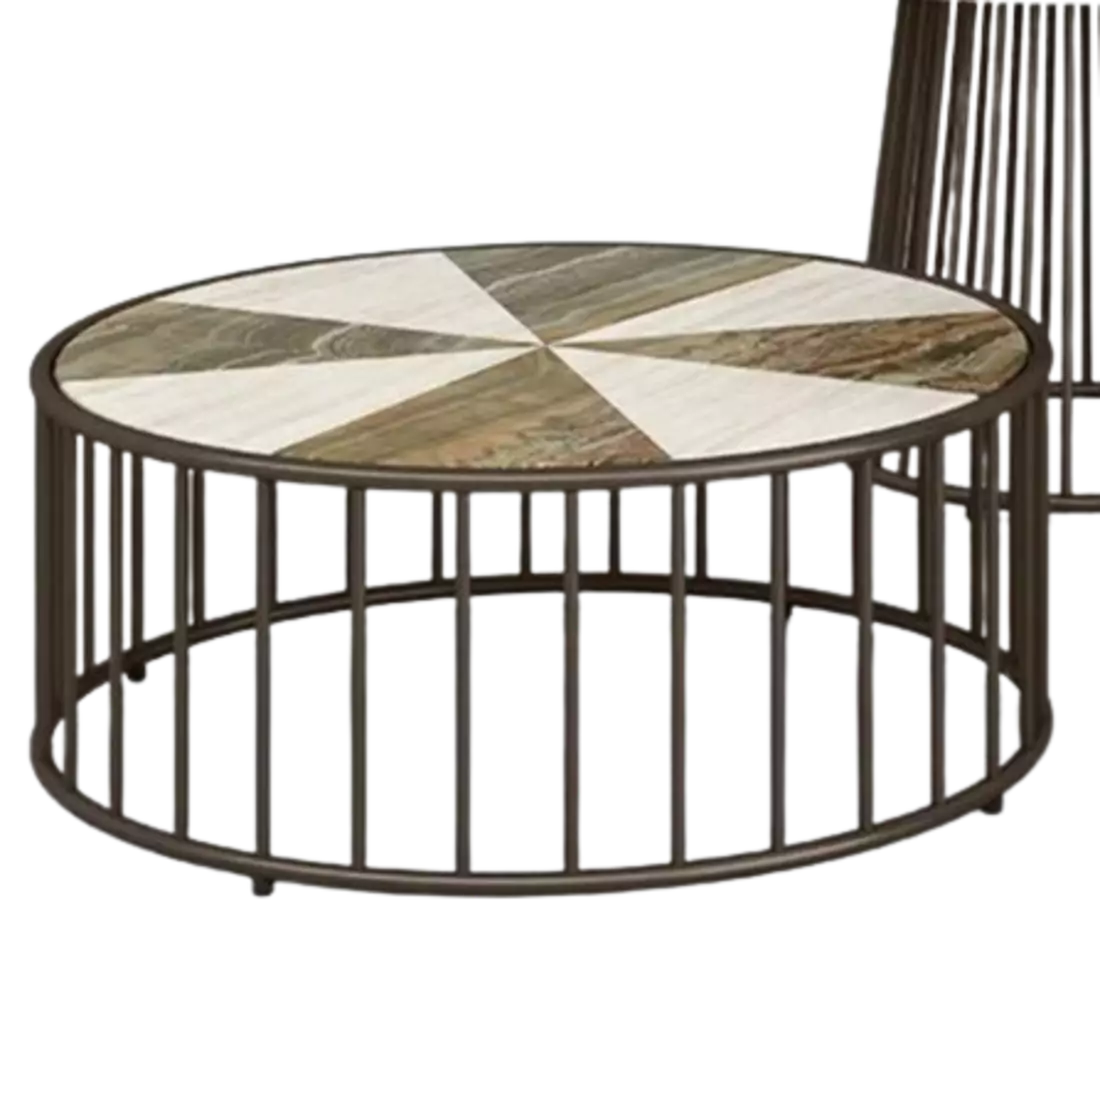 b_coffee-table-samuele-mazza-outdoor-collection-by-dfn-377048-relab797430-removebg-preview